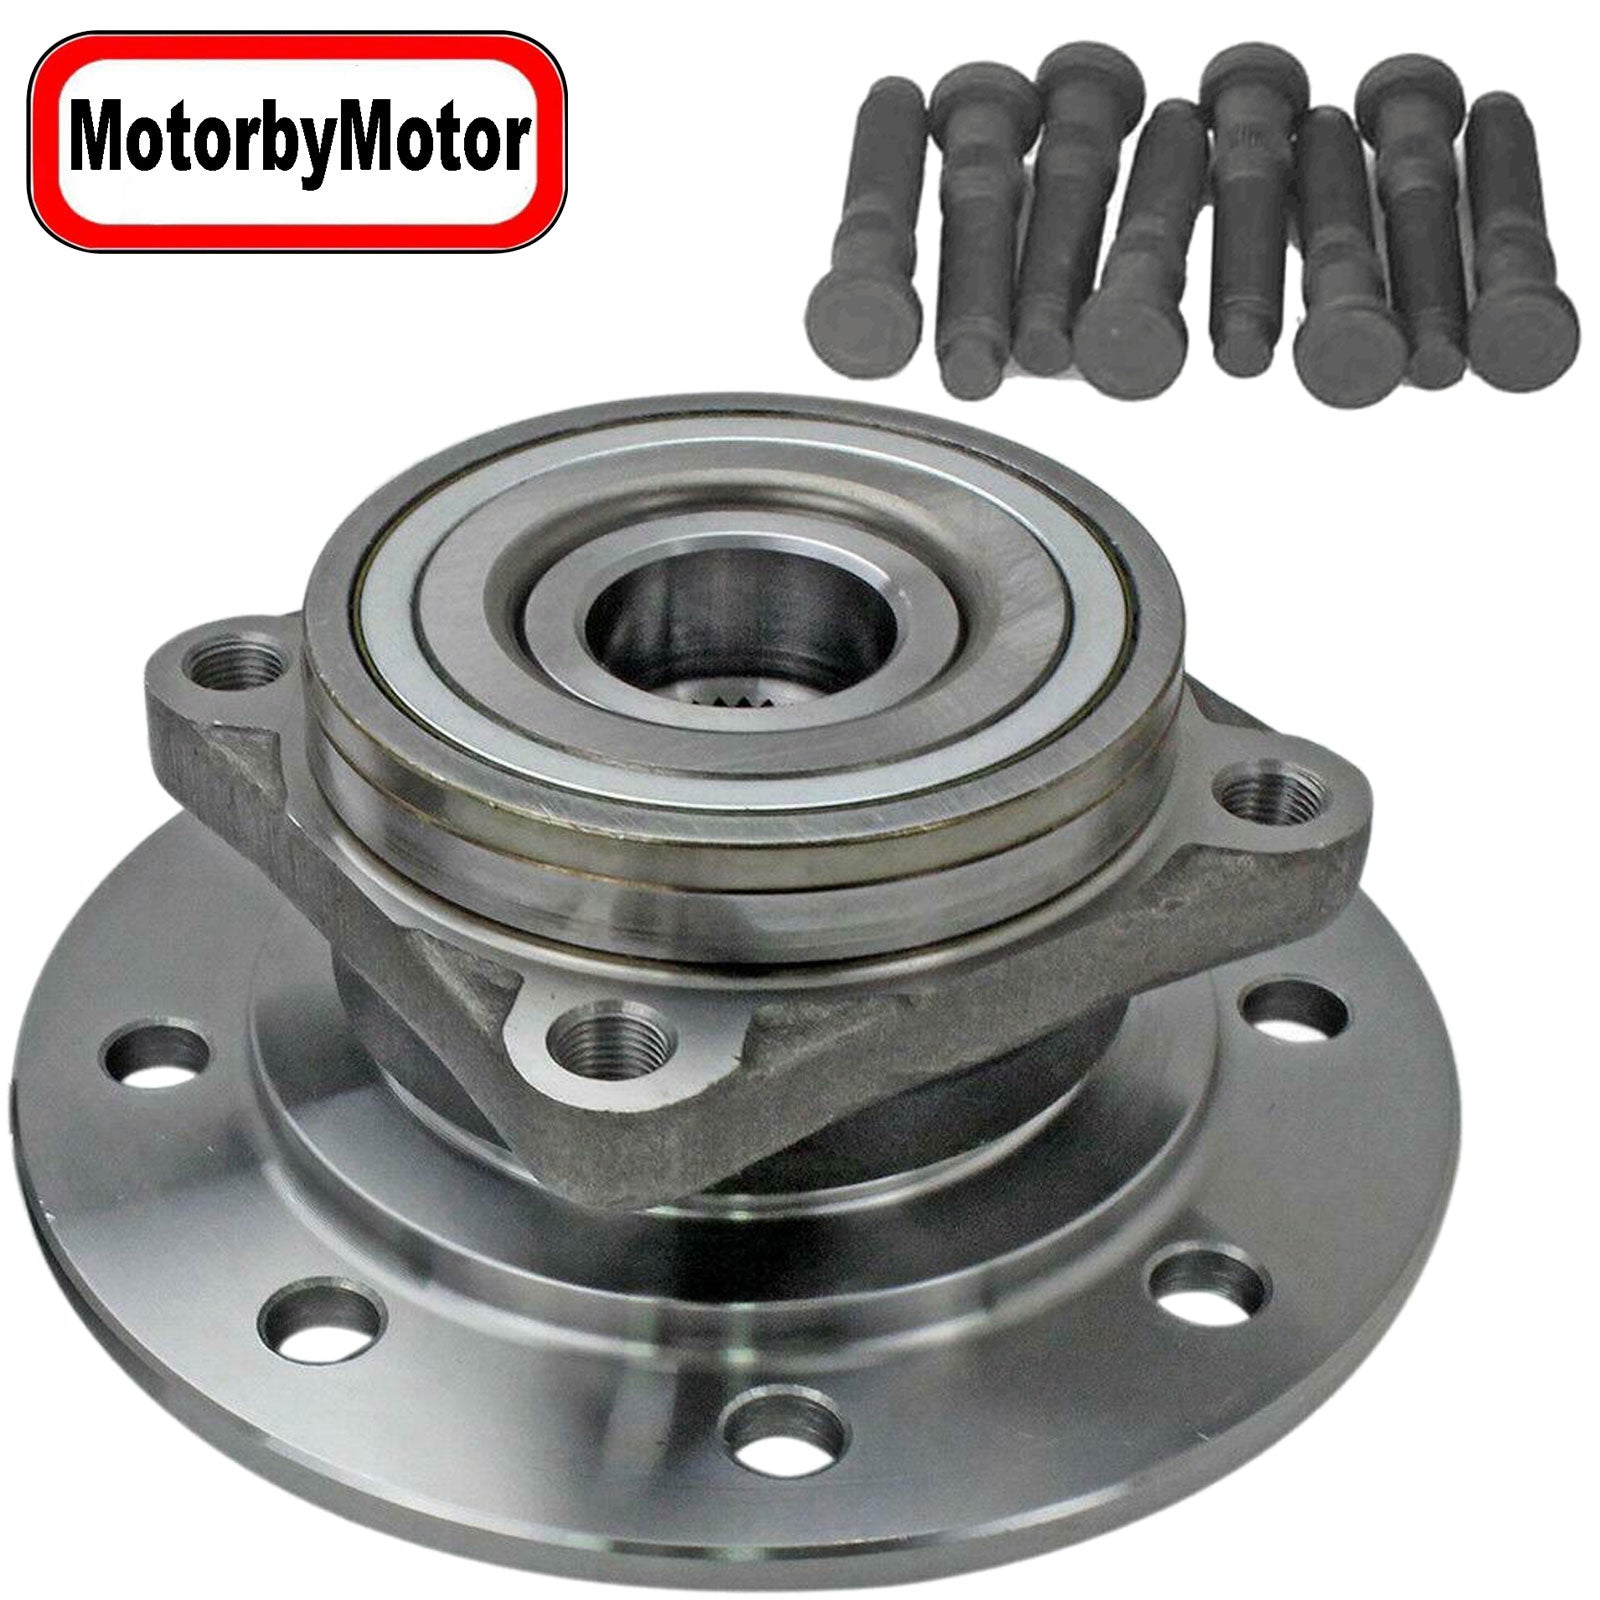 MotorbyMotor Front Wheel Bearing and Hub Assembly Replacement for 1994 1995 1996 1997 1998 1999 Dodge Ram(4WD), 1998 1999 Dodge Ram 3500 (RWD) Hub Bearing w/8 Lugs-515070 MotorbyMotor